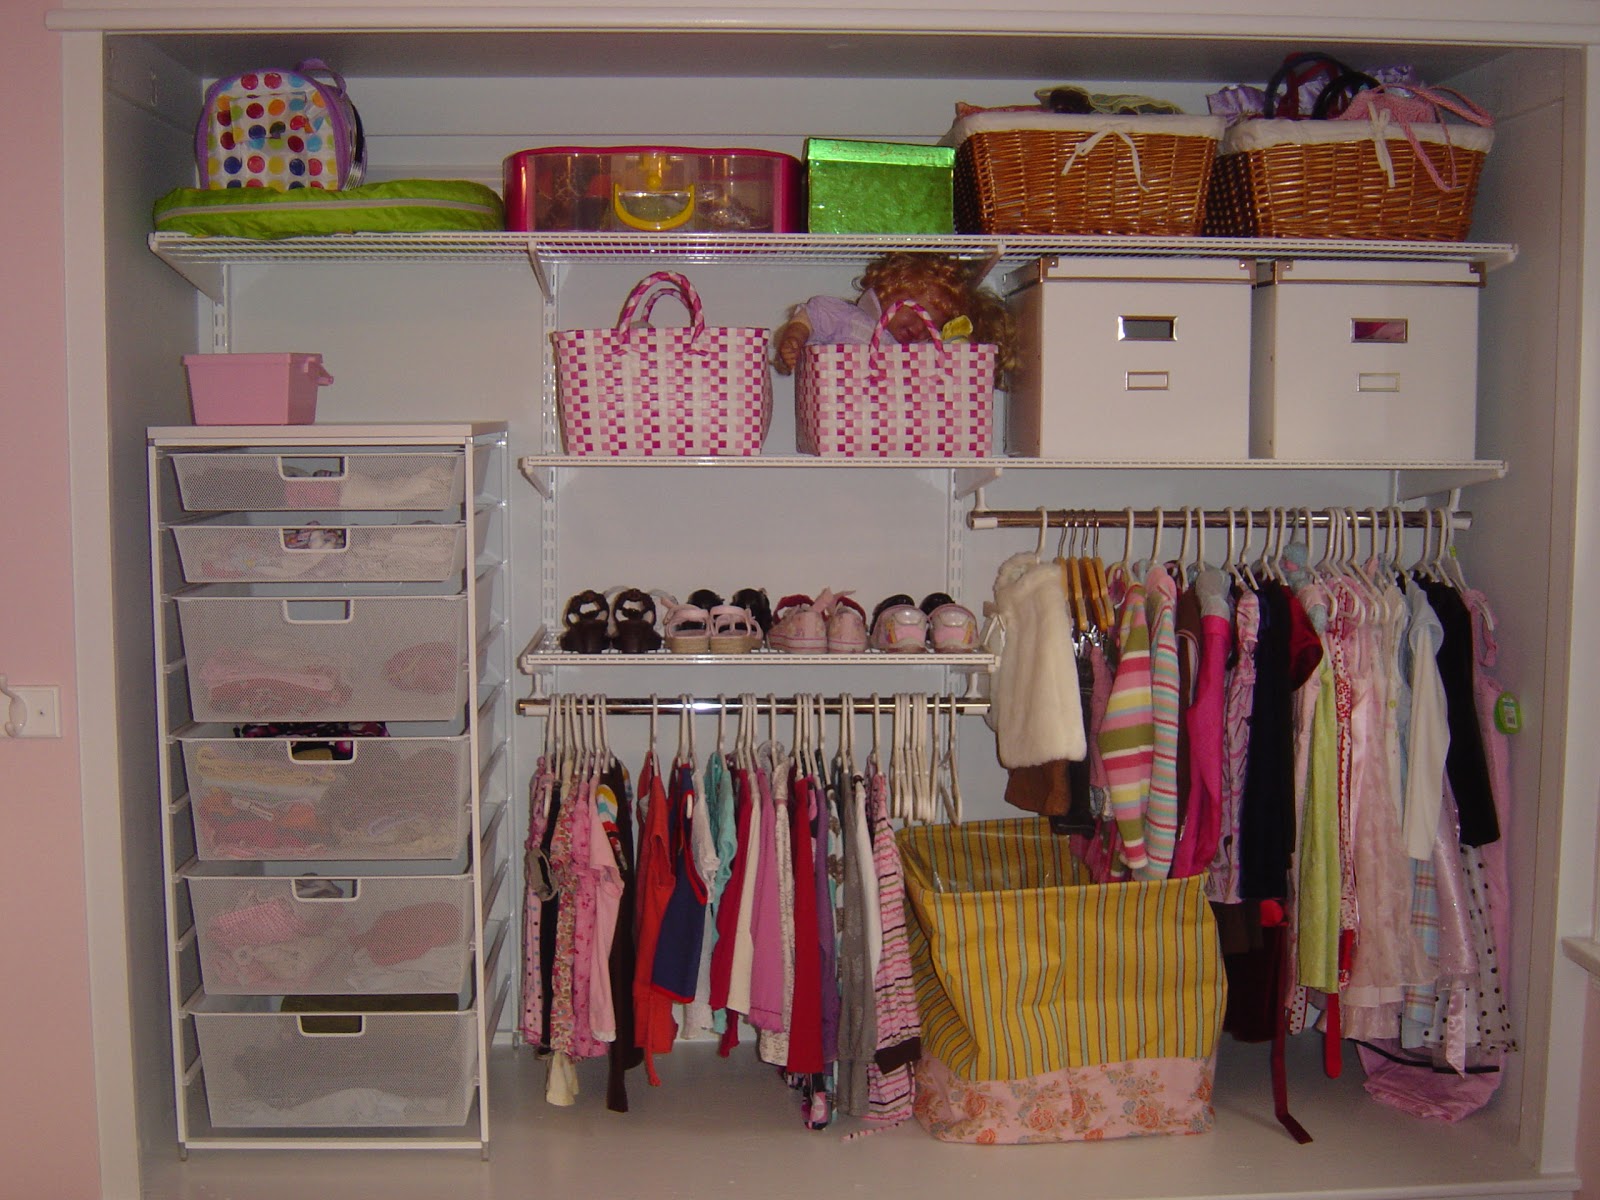 closet about four years ago - right after putting in her closet ...